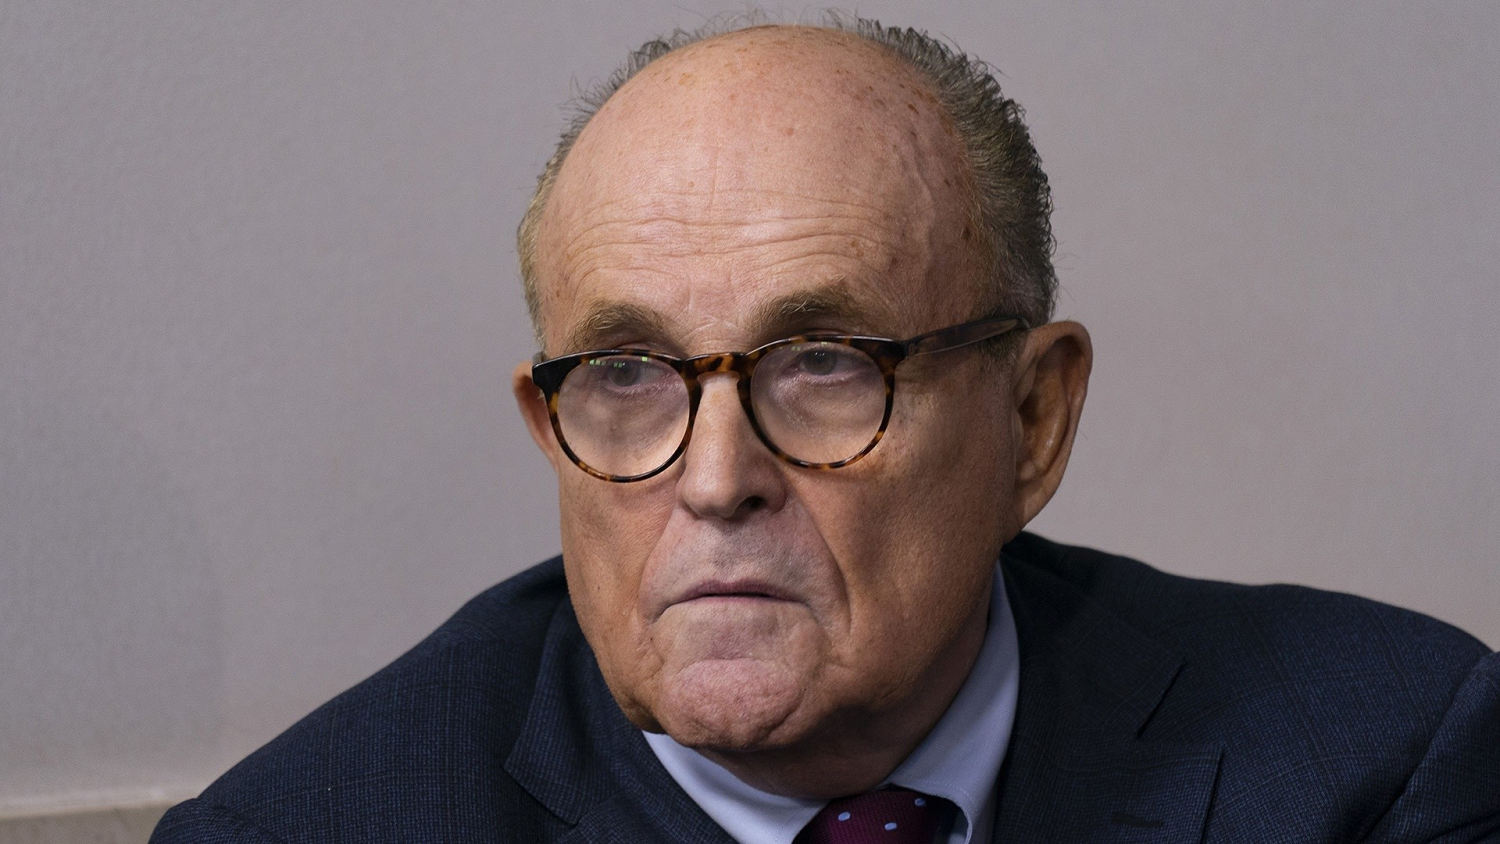 Rudy Giuliani disbarred in NY for trying to overturn 2020 election